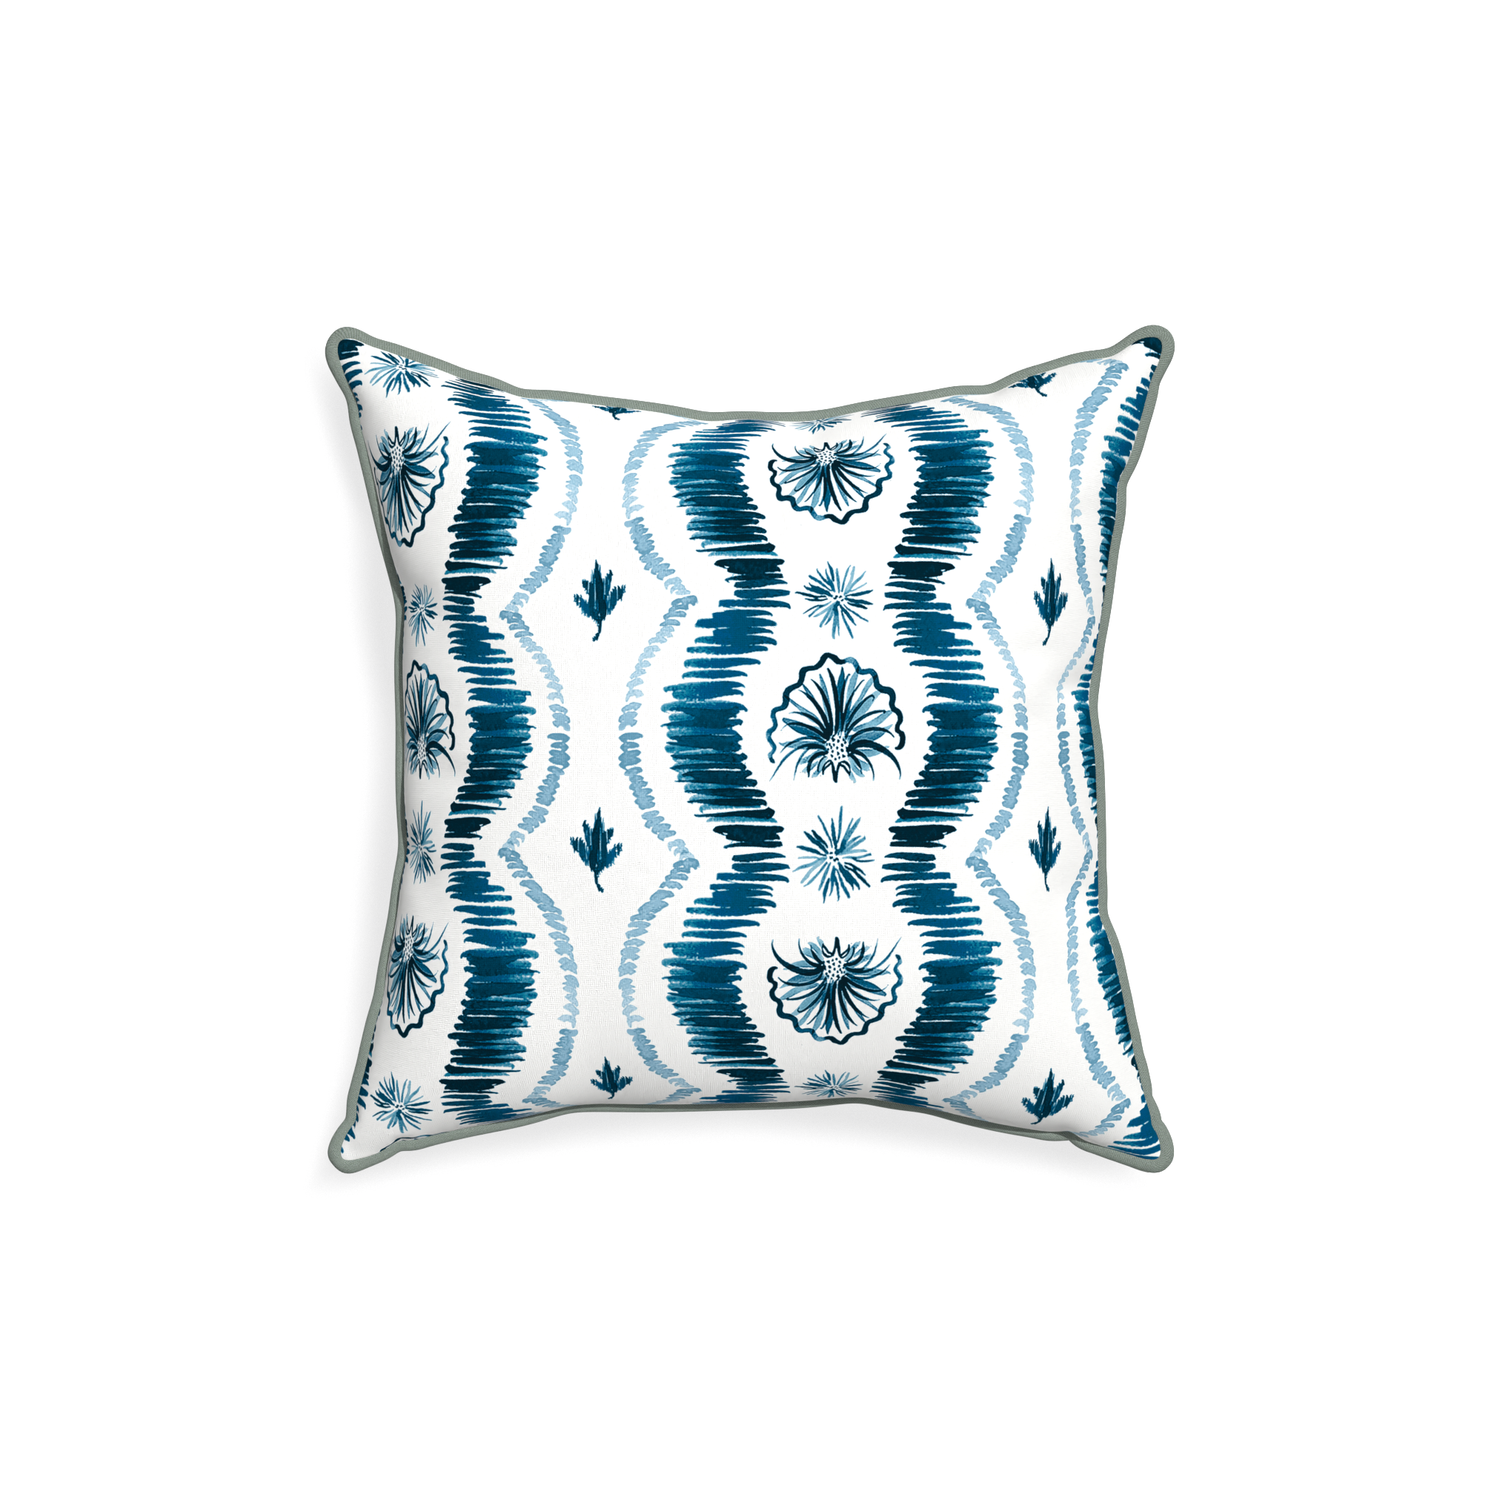 18-square alice custom blue ikatpillow with sage piping on white background